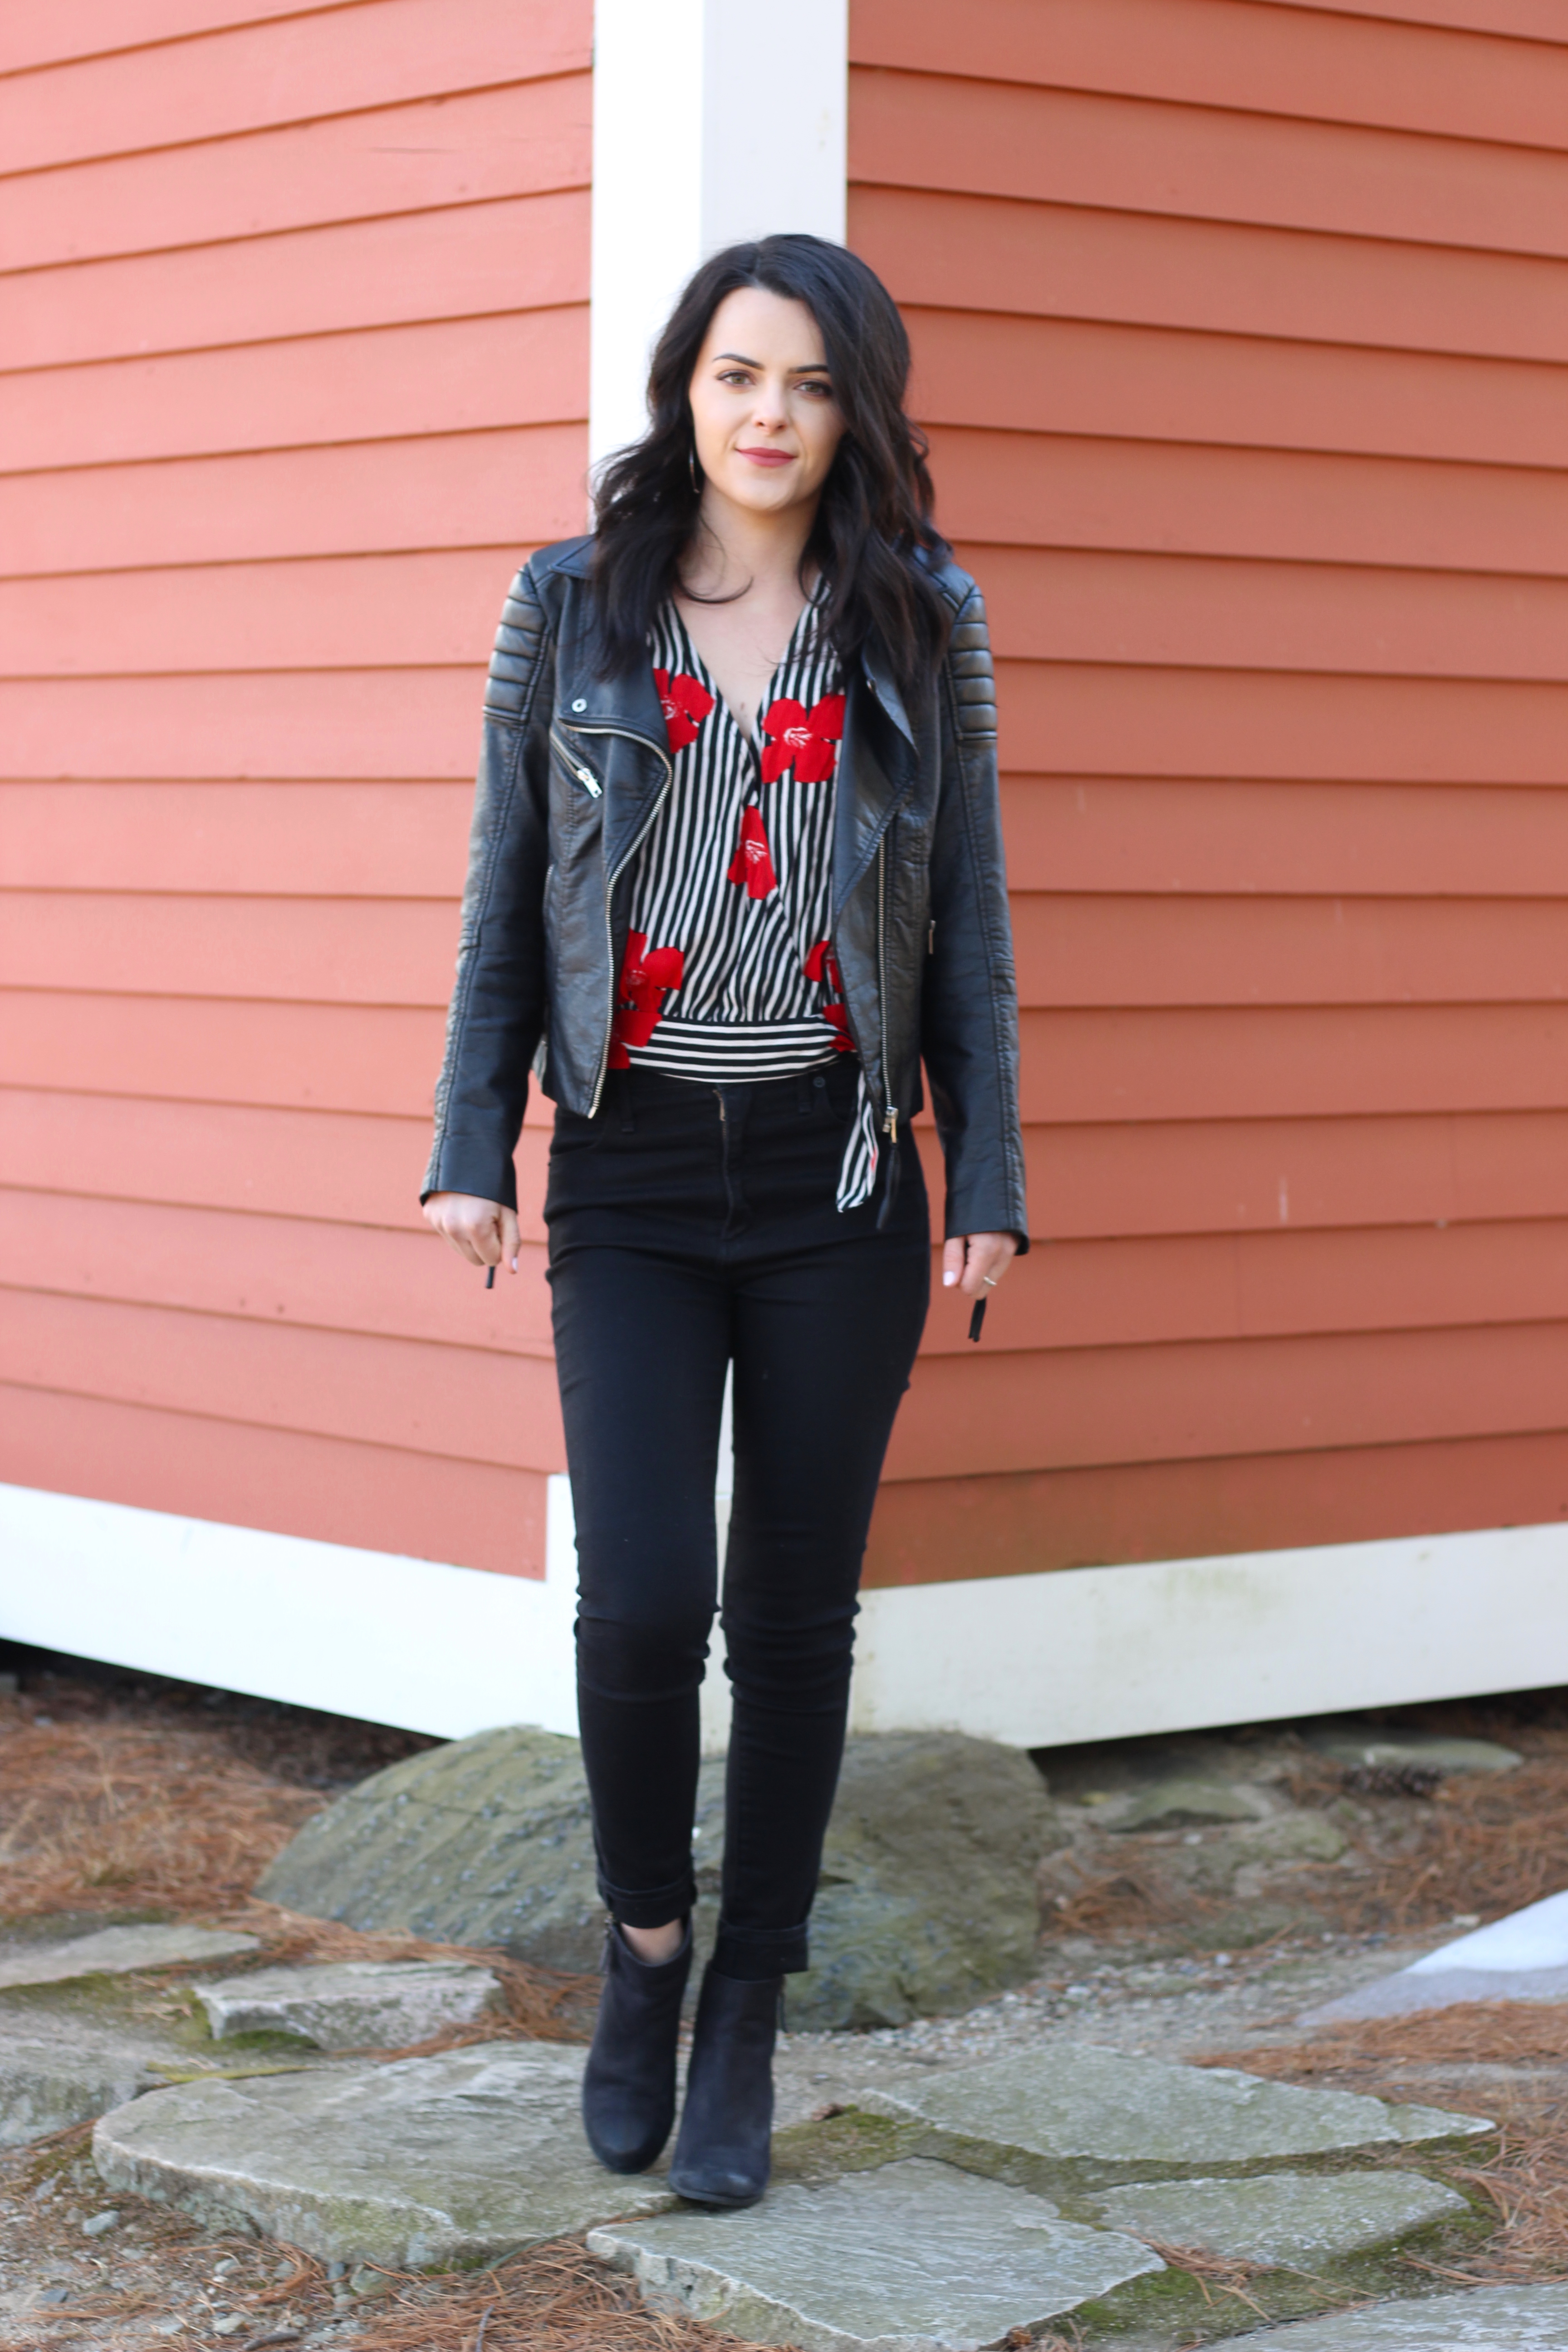 Valentine's Day Outfit + Easy Dessert